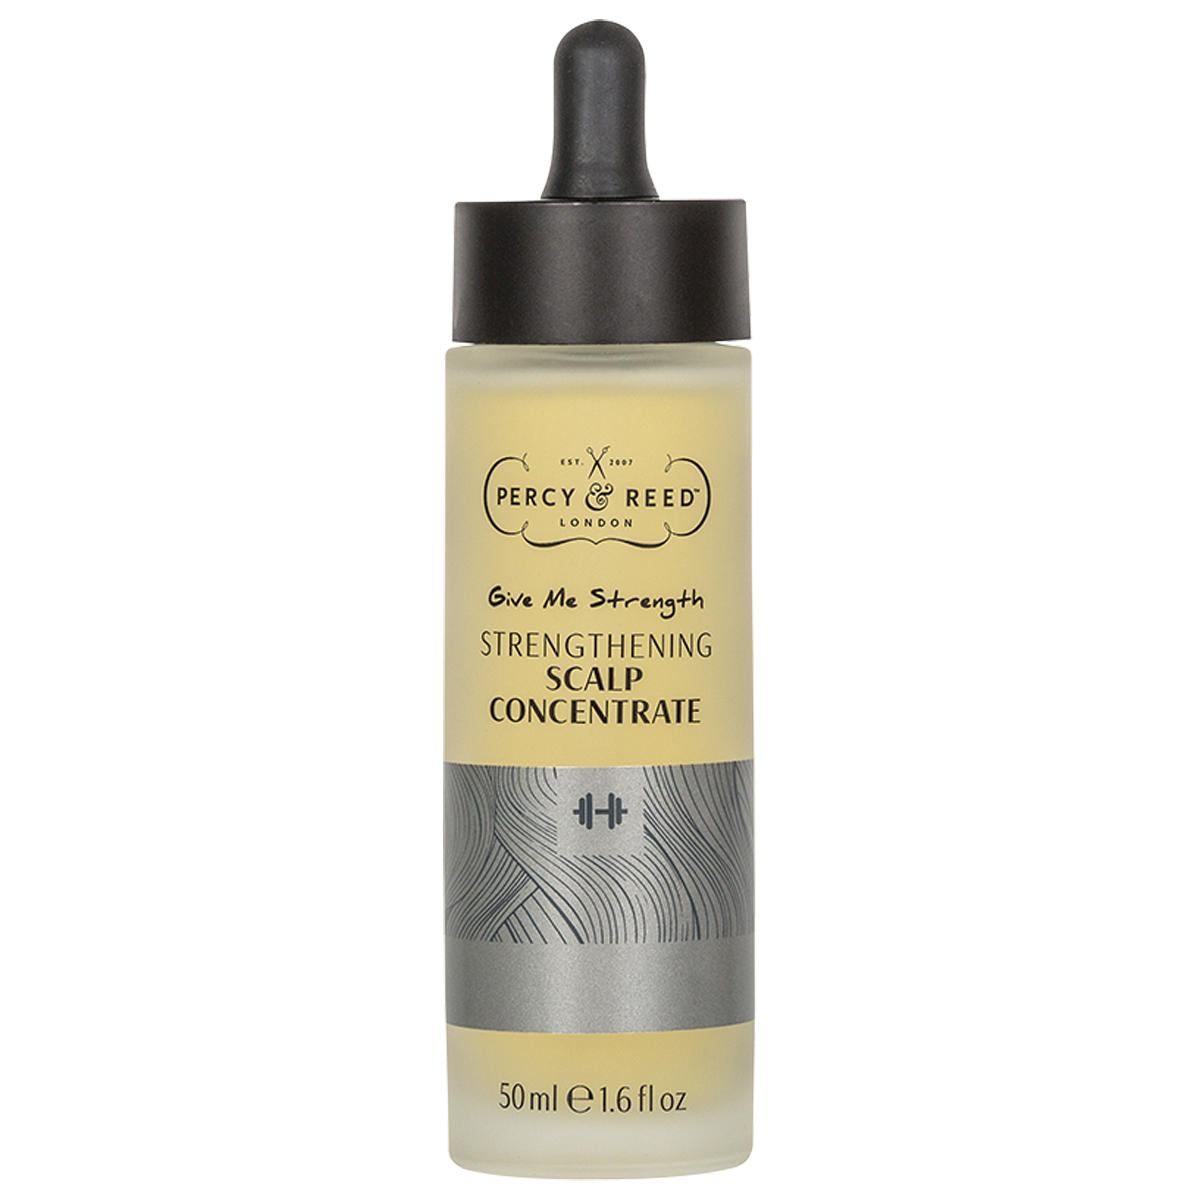 Percy & Reed Give Me Strength Strengtheming Scalp Concentrate 50 ml - 1